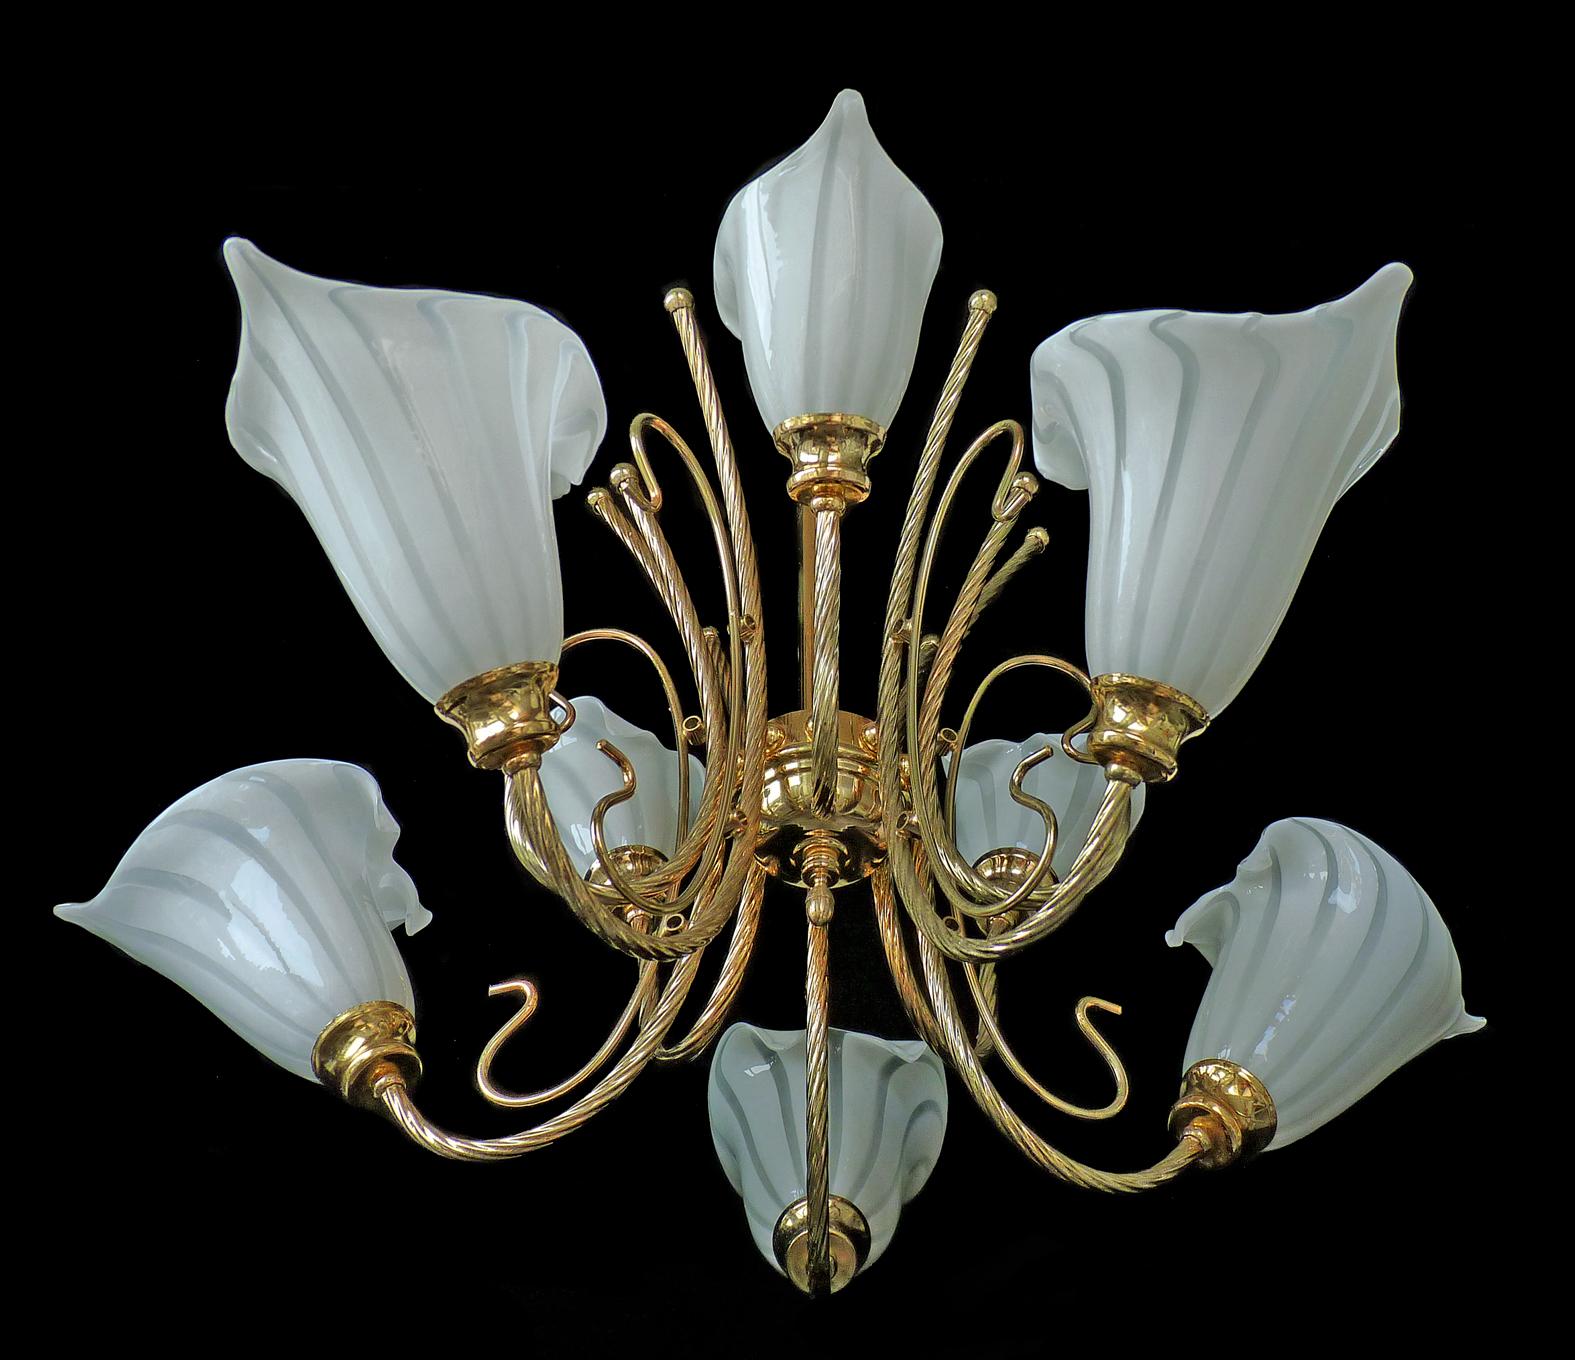 Awesome 1970s vintage Italian Murano Lily Calla art glass shades gilt chandelier. Franco Luce Seguso chandelier with 10 hand blown Murano glass shades, white and clear glass and gilt brass.
Measures:
Diameter 31.5 in/ 80 cm
Height 39.4 in/ 100 cm /